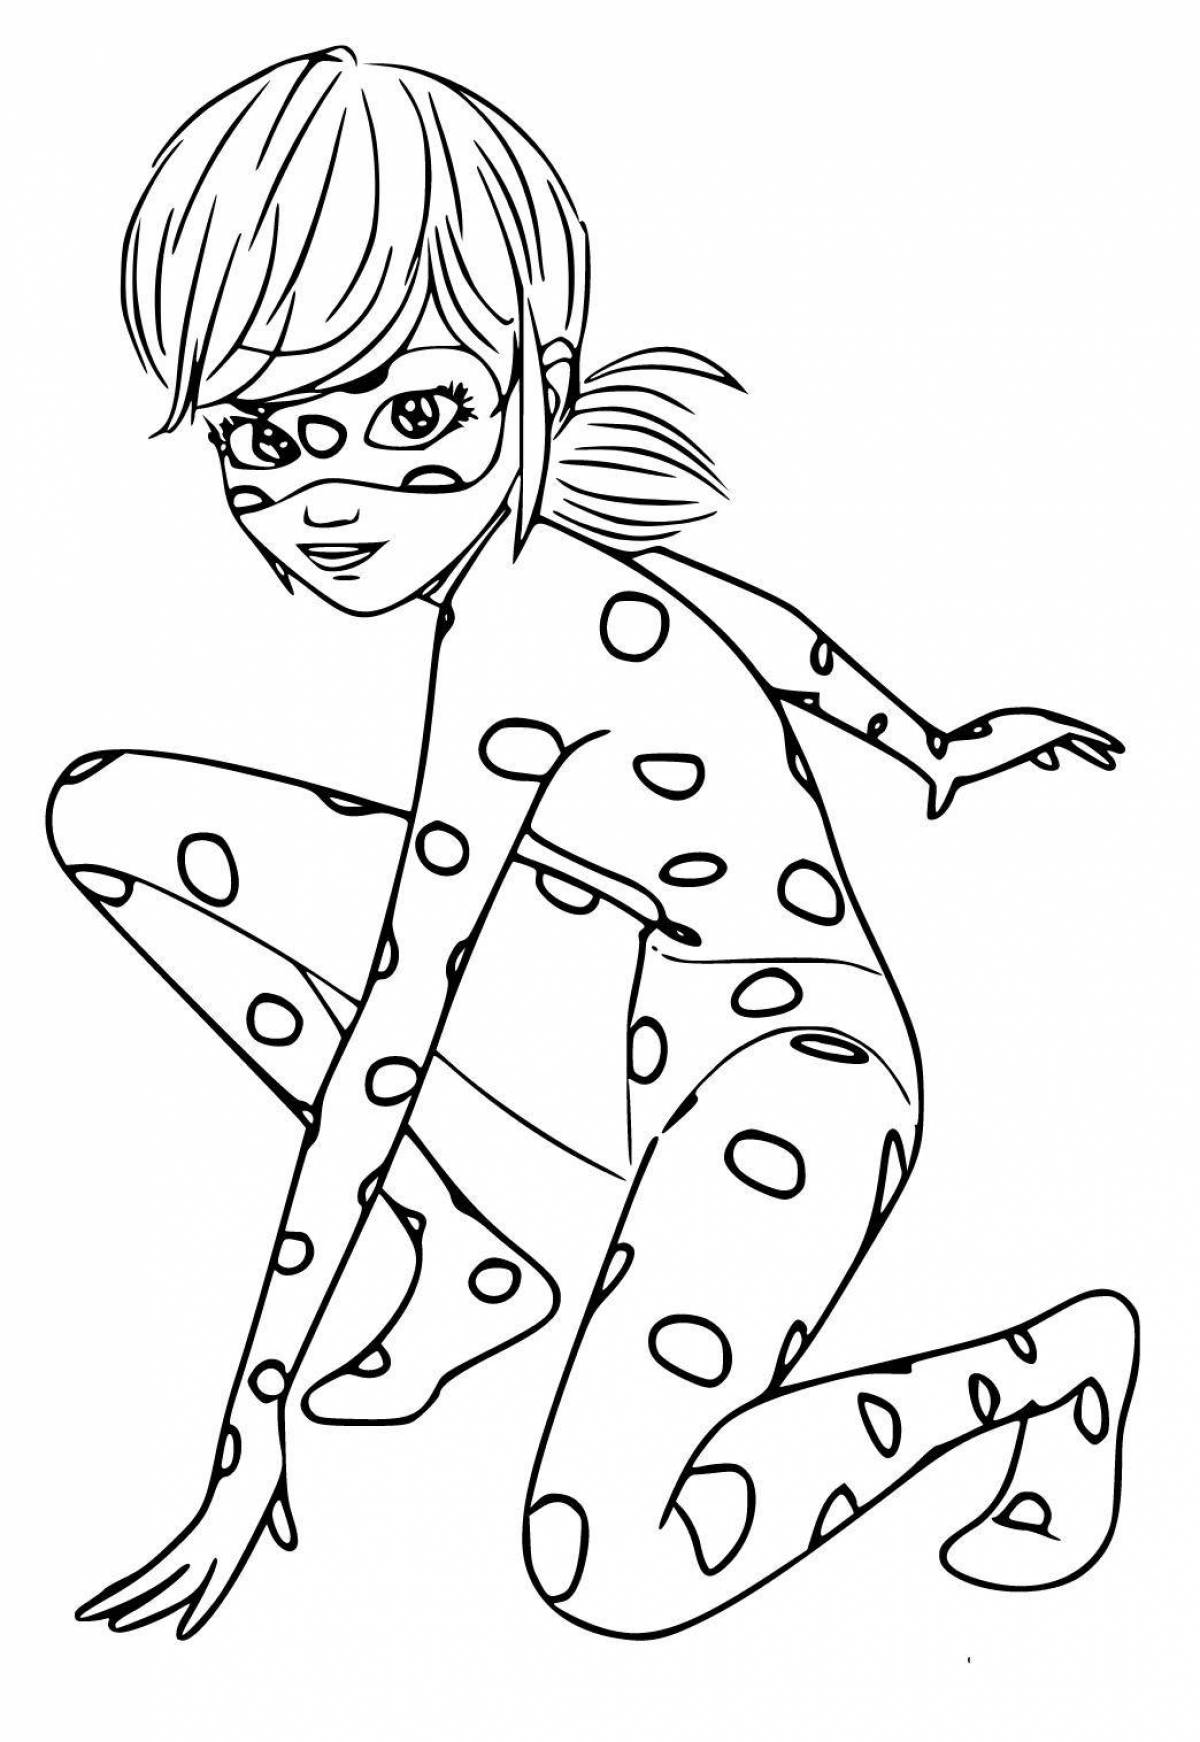 Lady Bug luminous earrings coloring page